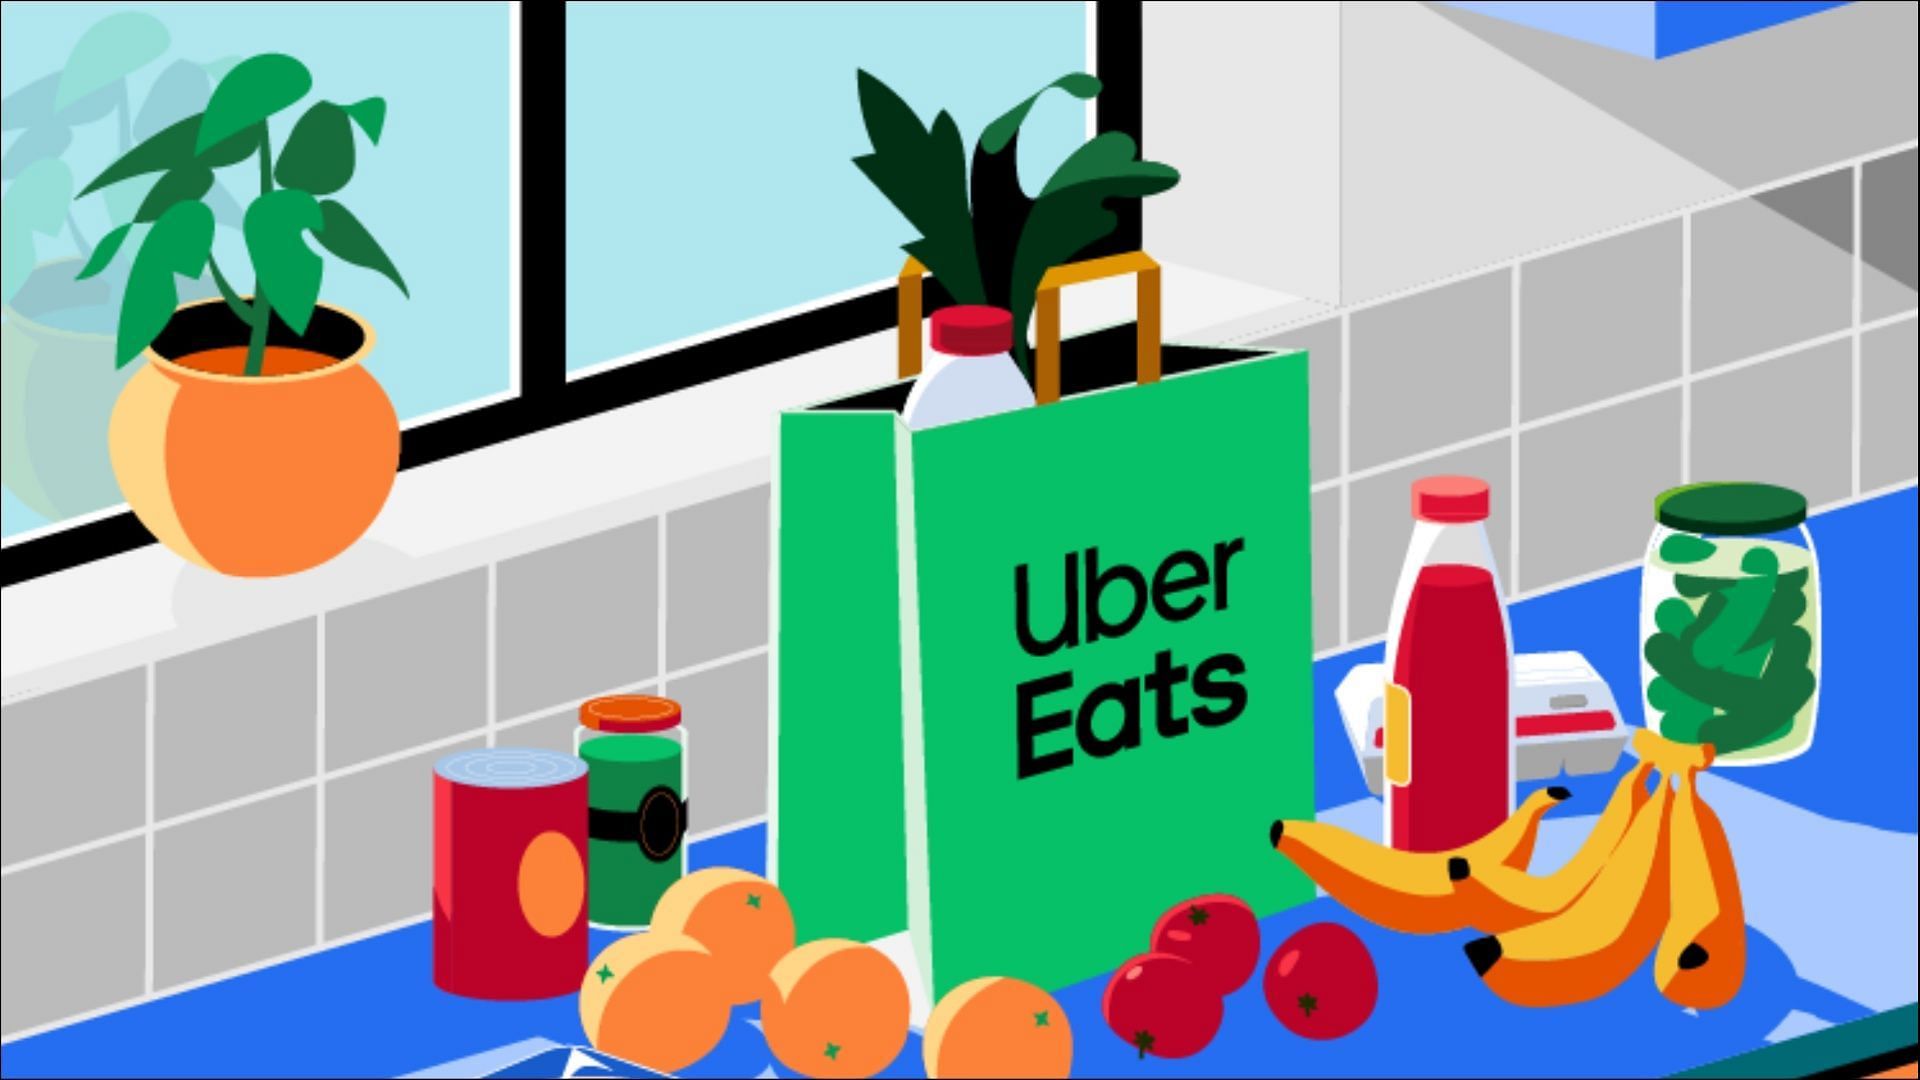 Customers may soon be able to pay for their U. Eats grocery orders with various flexible payment options (Image via Uber Eats)